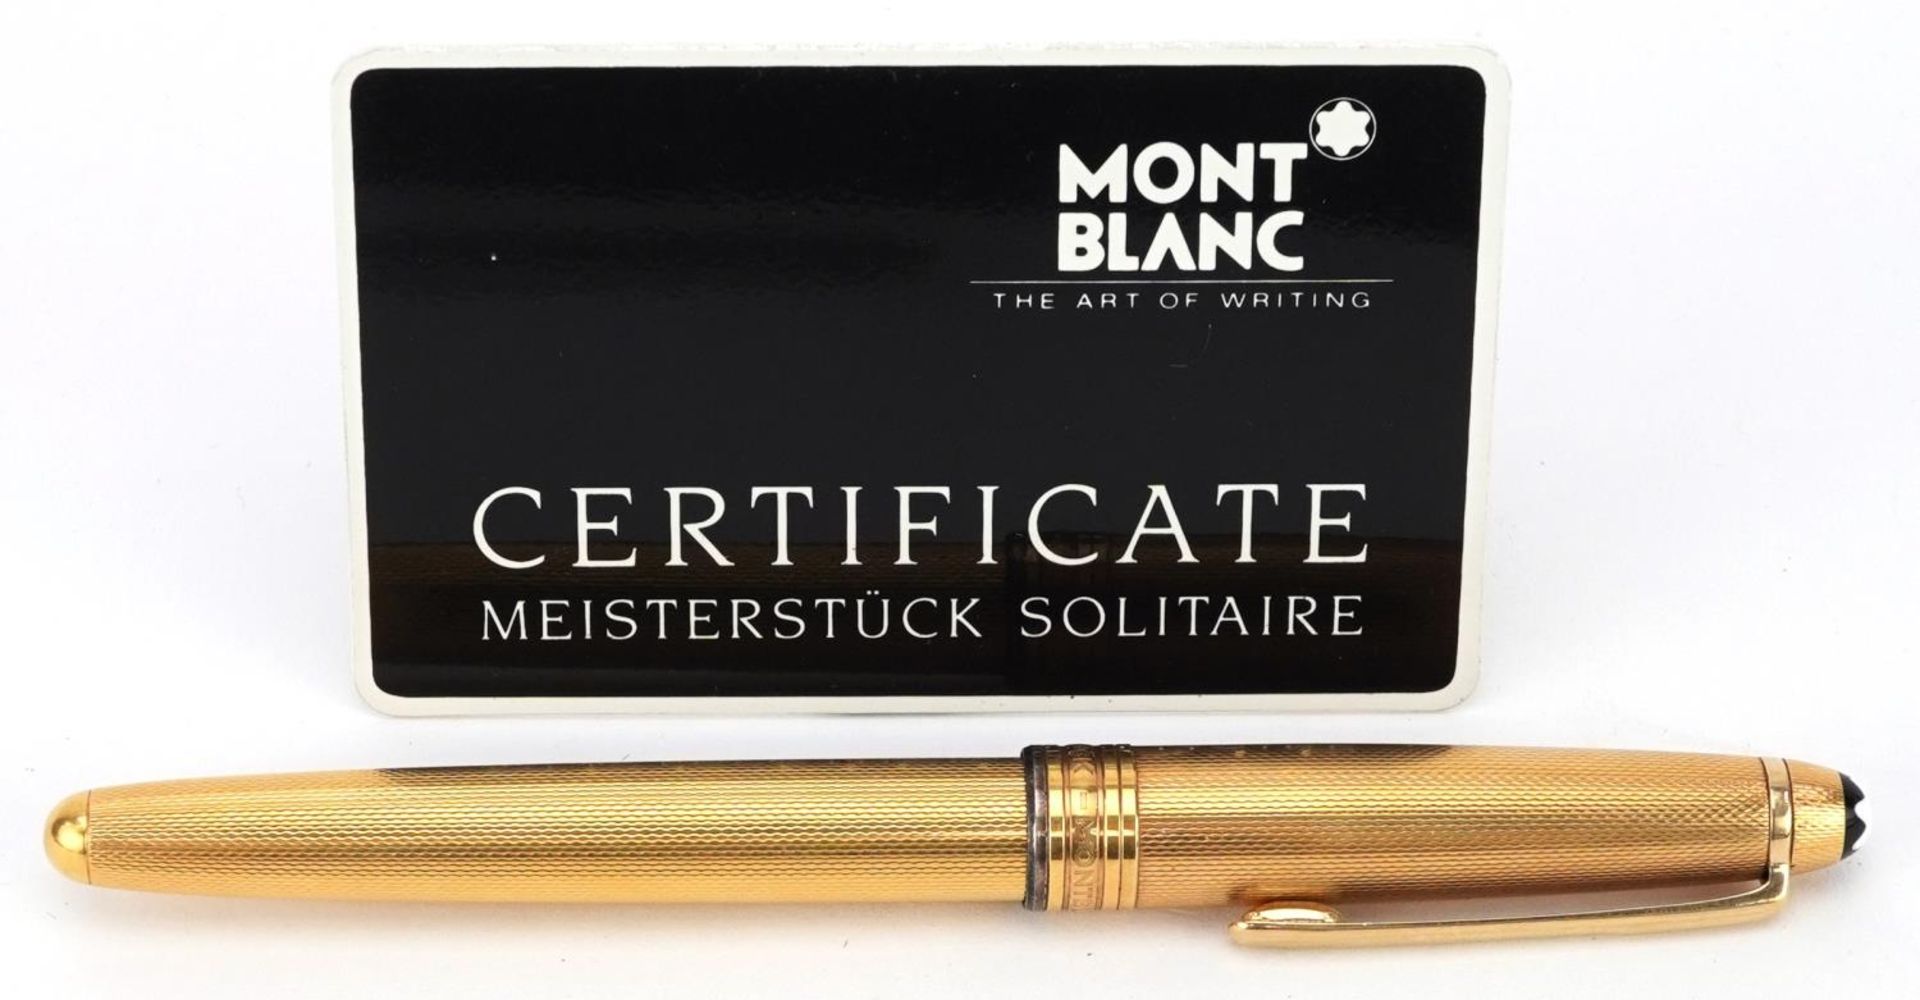 Montblanc Meisterstuck Solitaire fountain pen with 18k gold nib with certificate card : For - Image 2 of 4